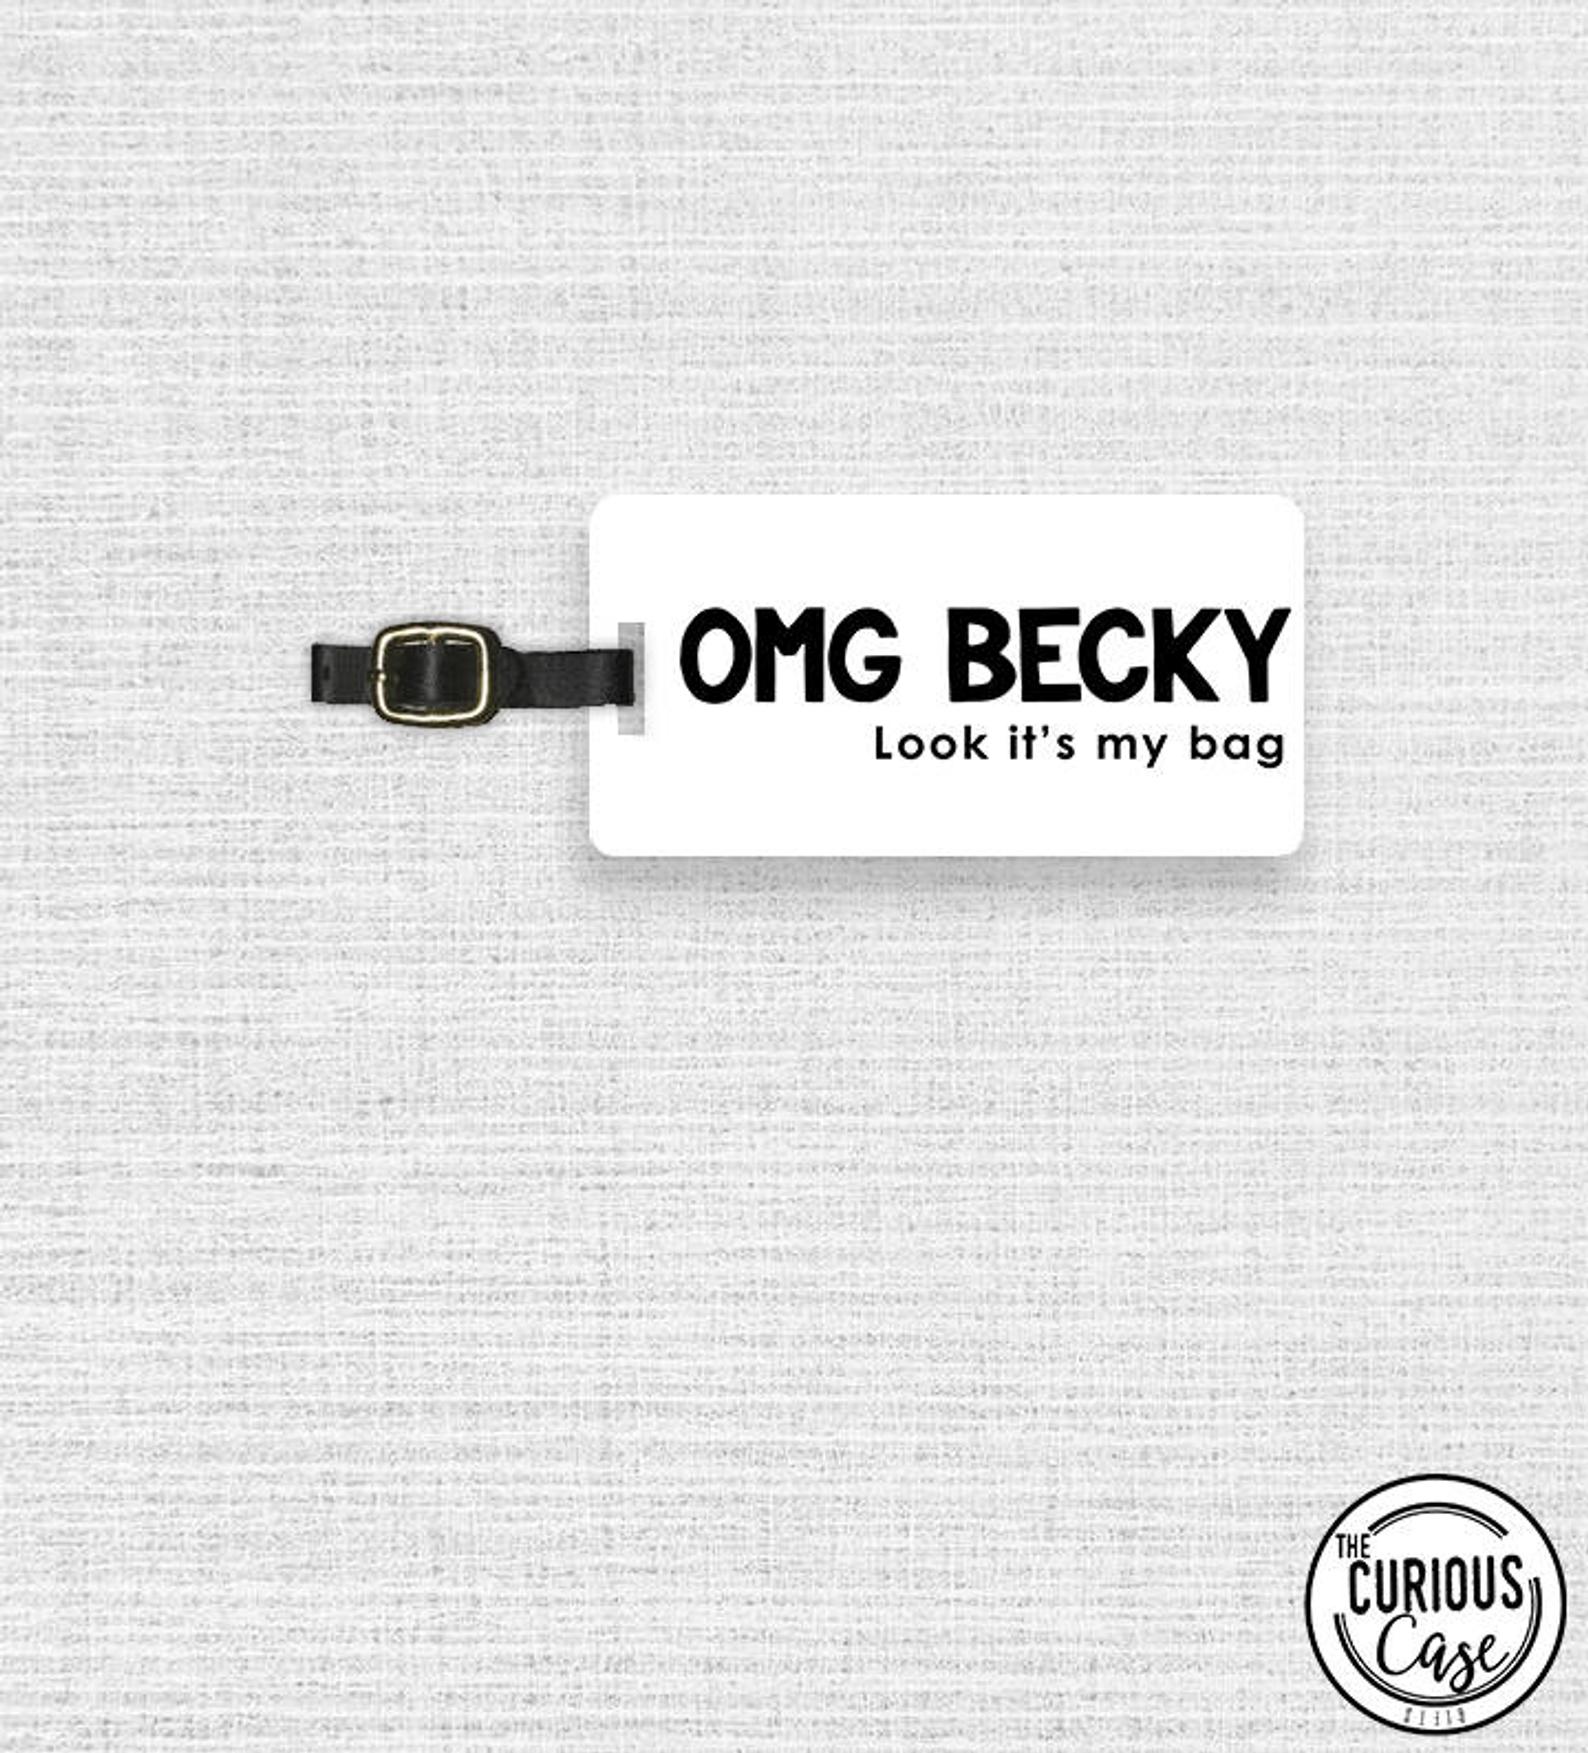 funny luggage tags - omg becky look it's my bag